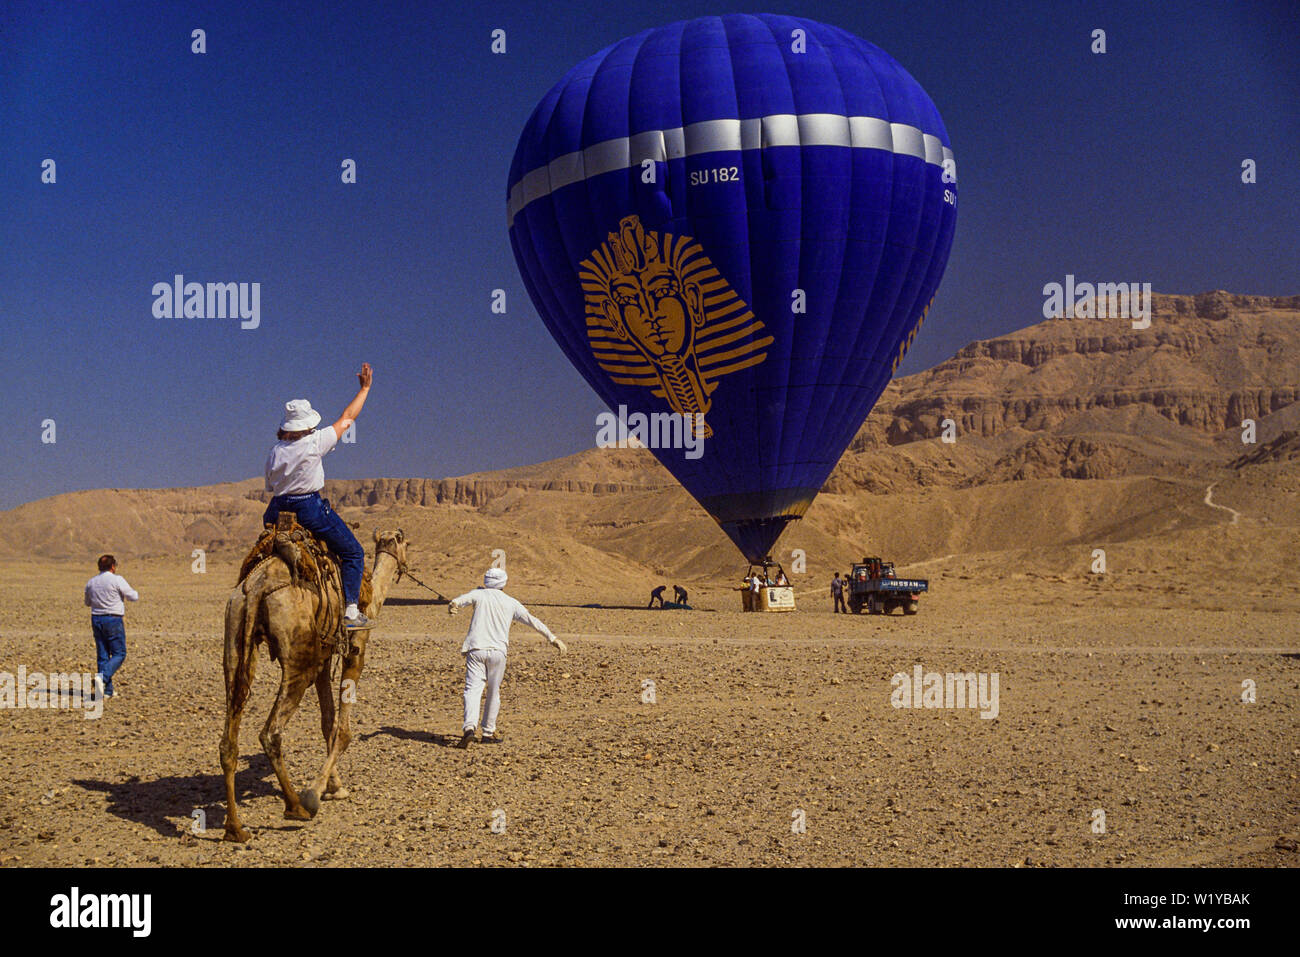 Hot air ballooning over the Valley of the Kings, Luxor, Egypt. A tourist follows the balloon on camelback. Photo: © Simon Grosset. Archive: Image digi Stock Photo